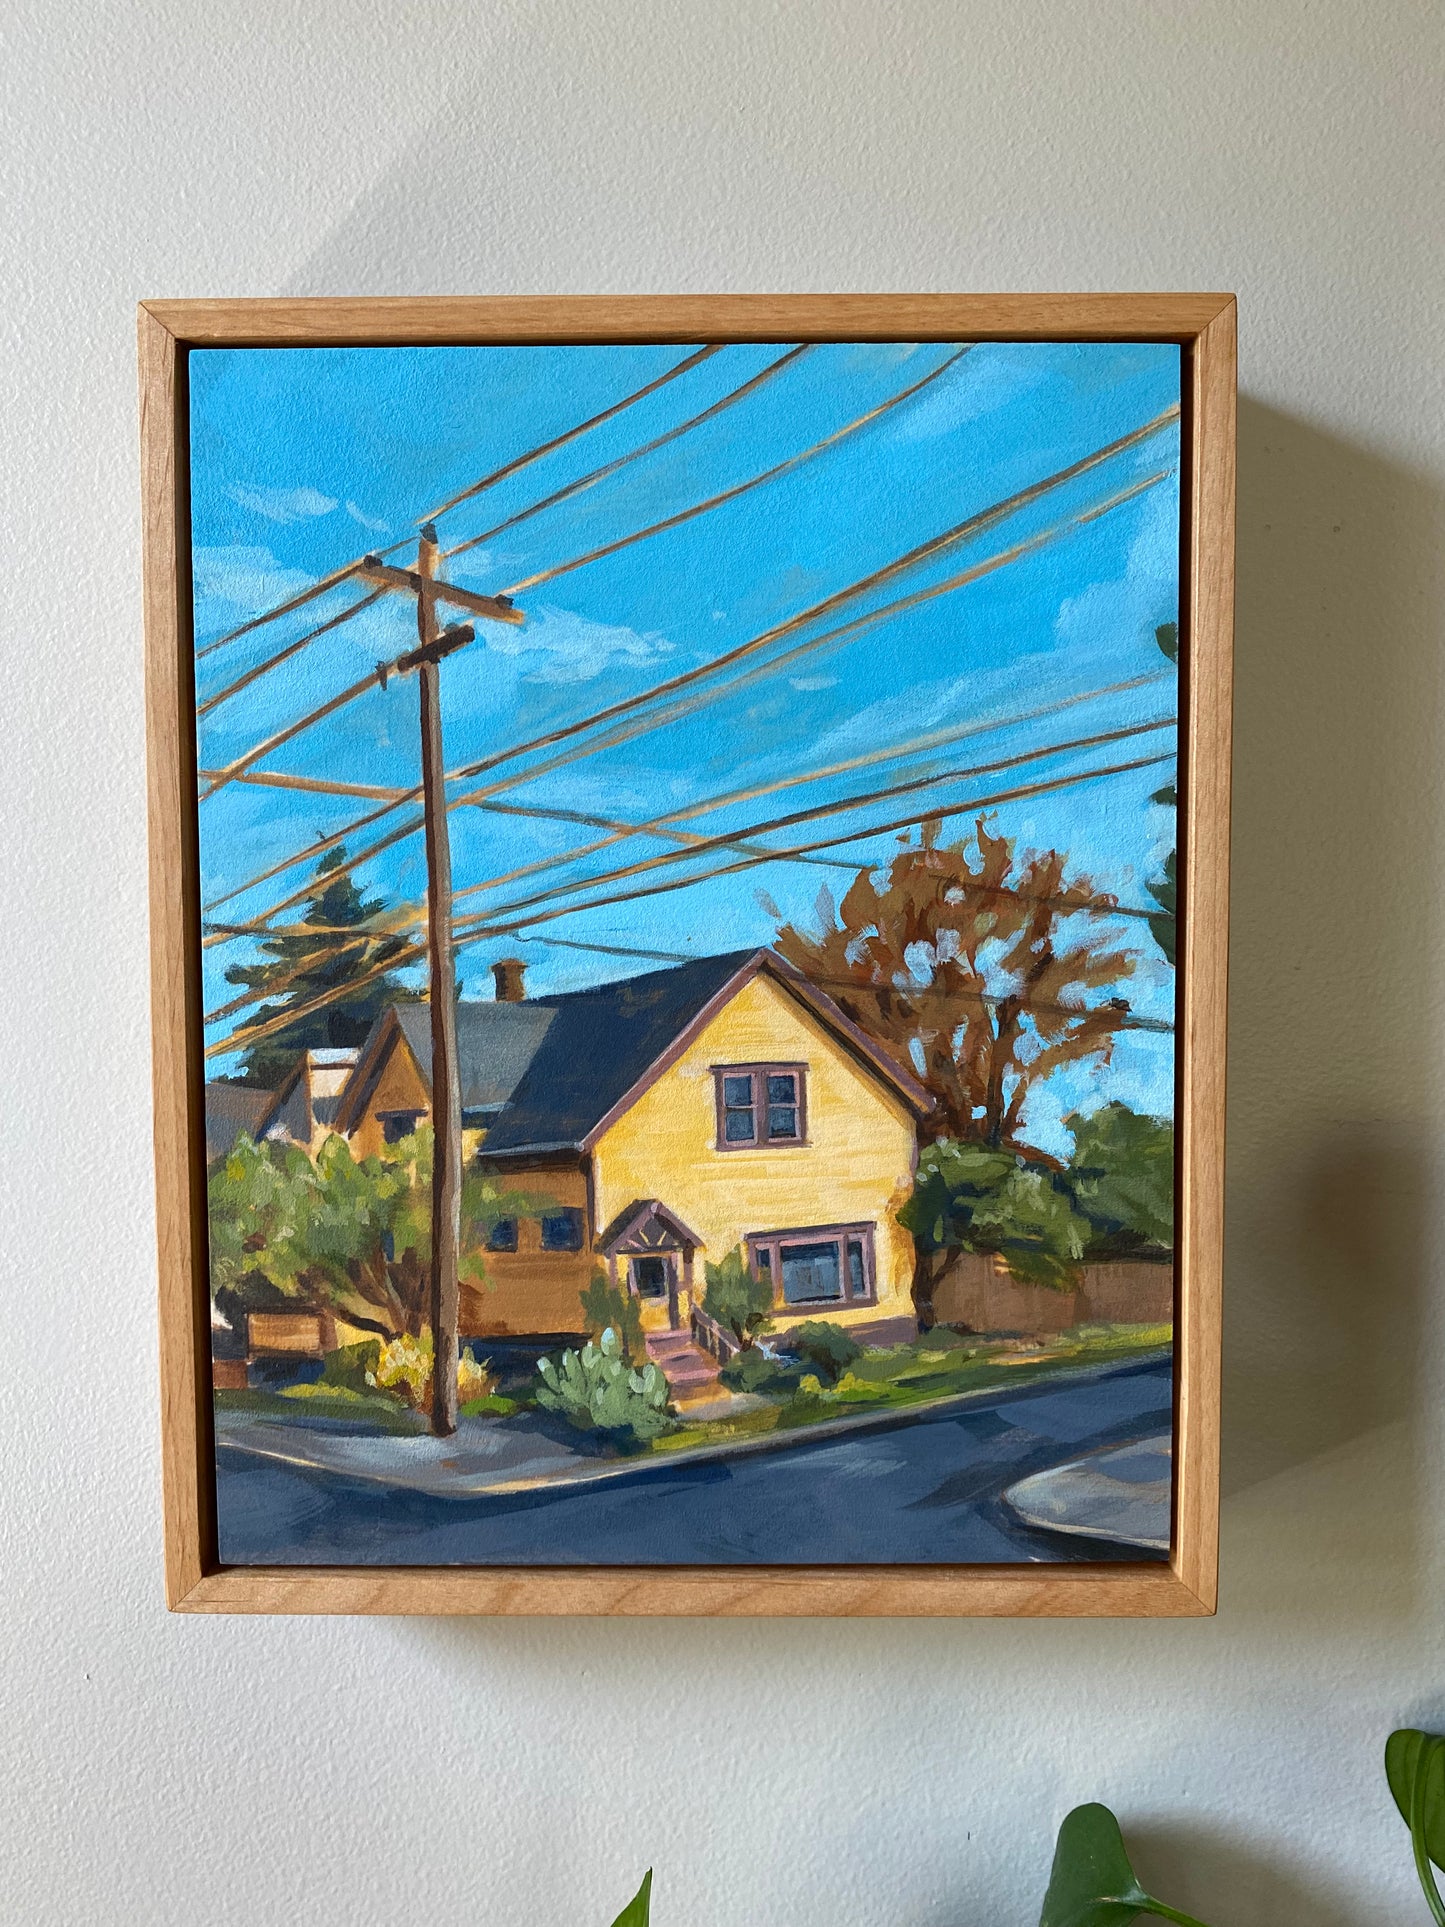 Framed 8x10 painting of a yellow house in a Portland neighborhood